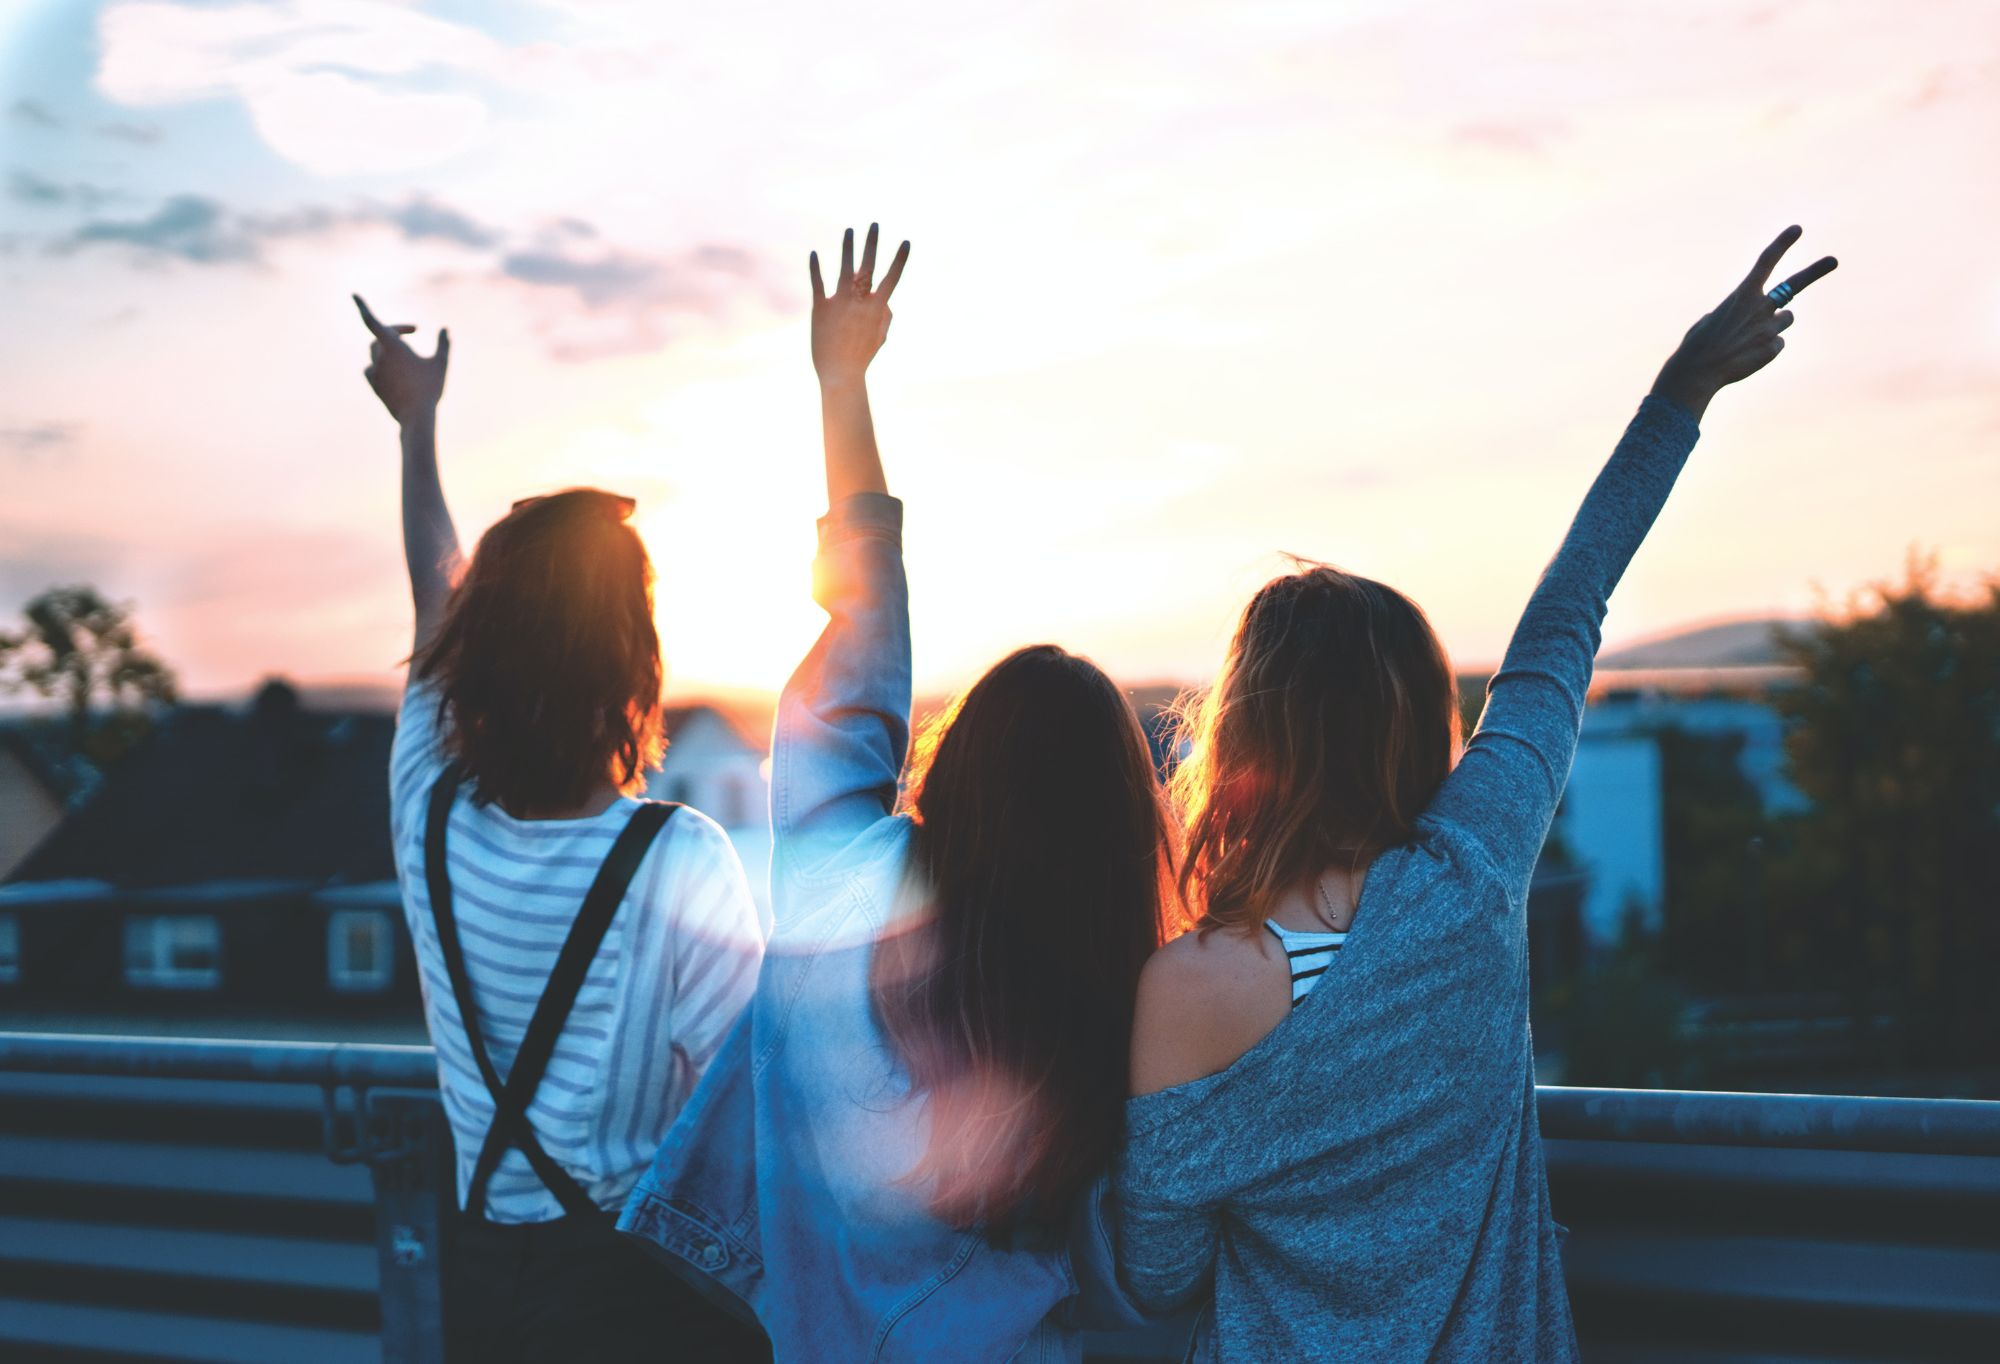 Three college students with long hair raise their arms to the sunset